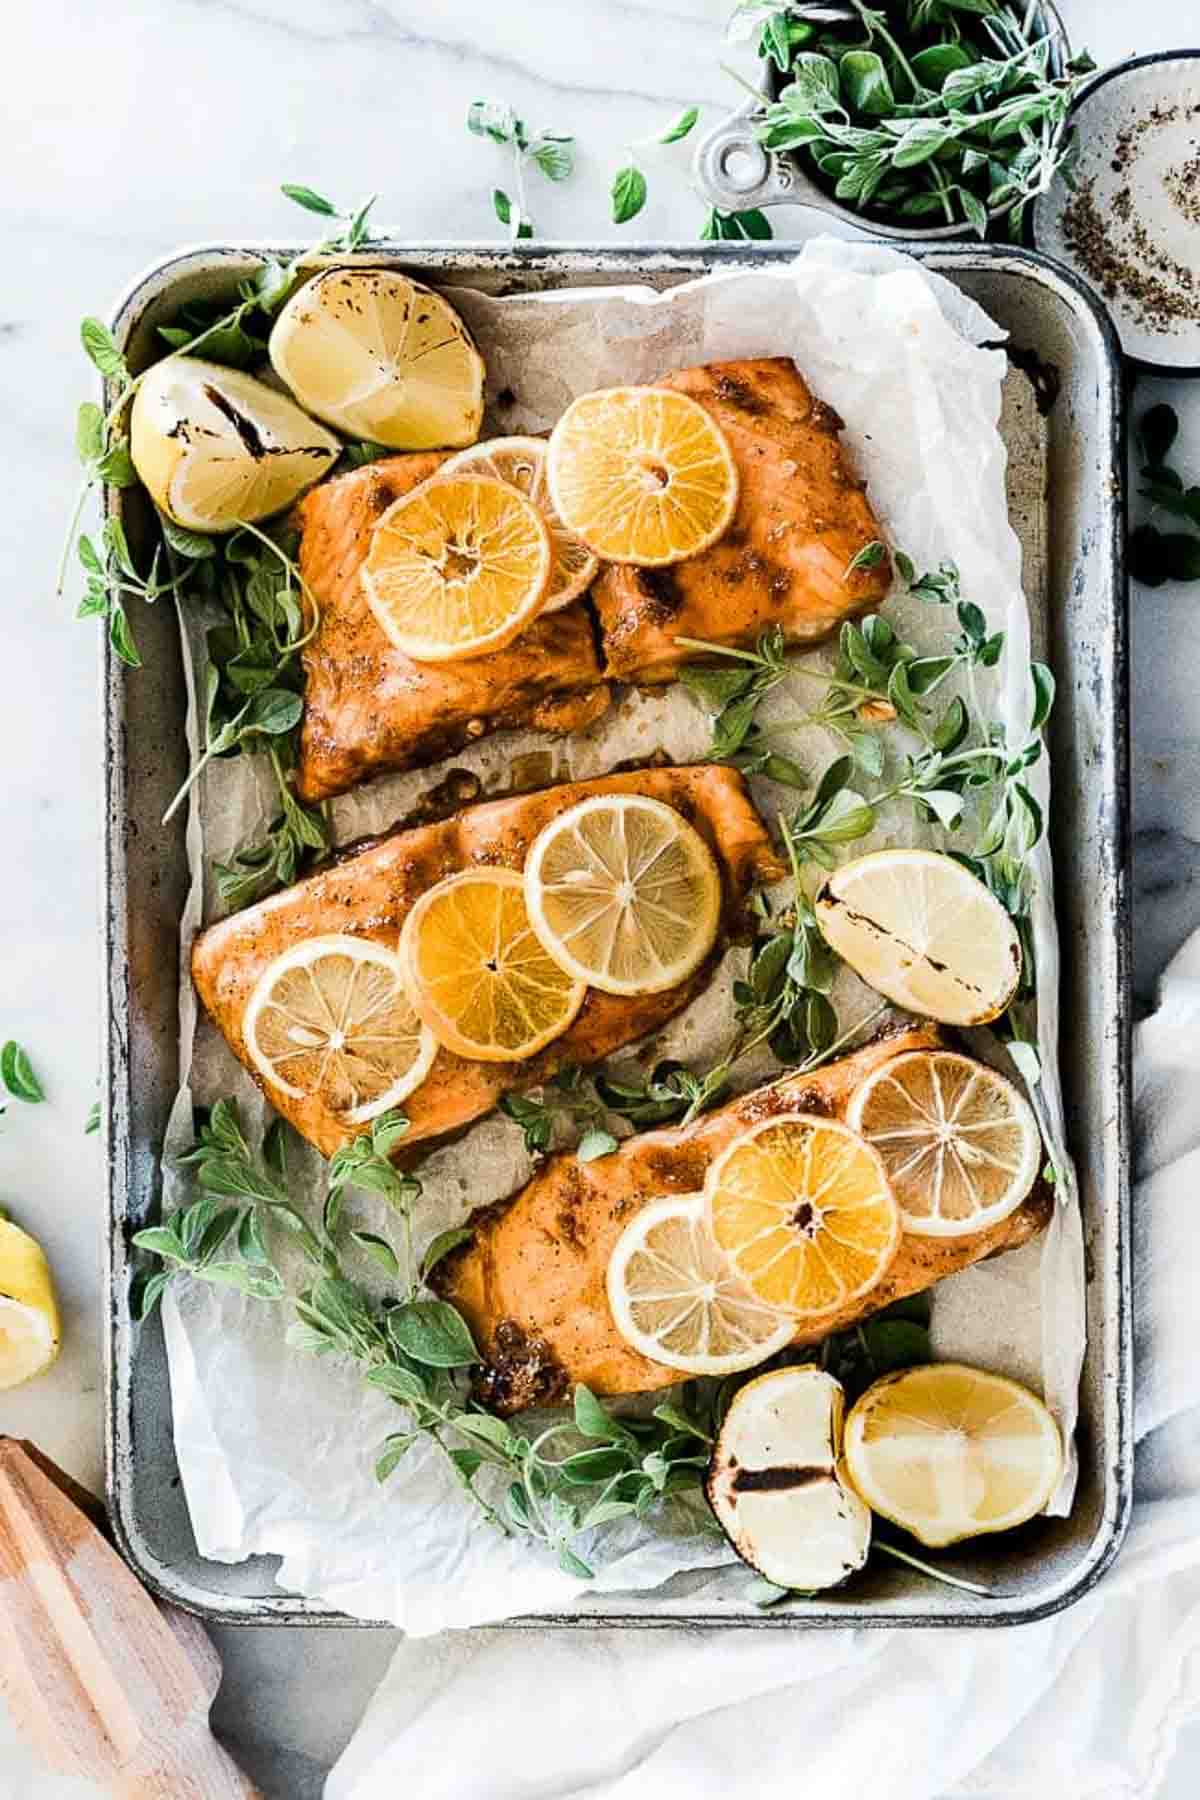 Citrus salmon in a metal sheet pan, it is surrounded by greens and garnished with citrus slices.